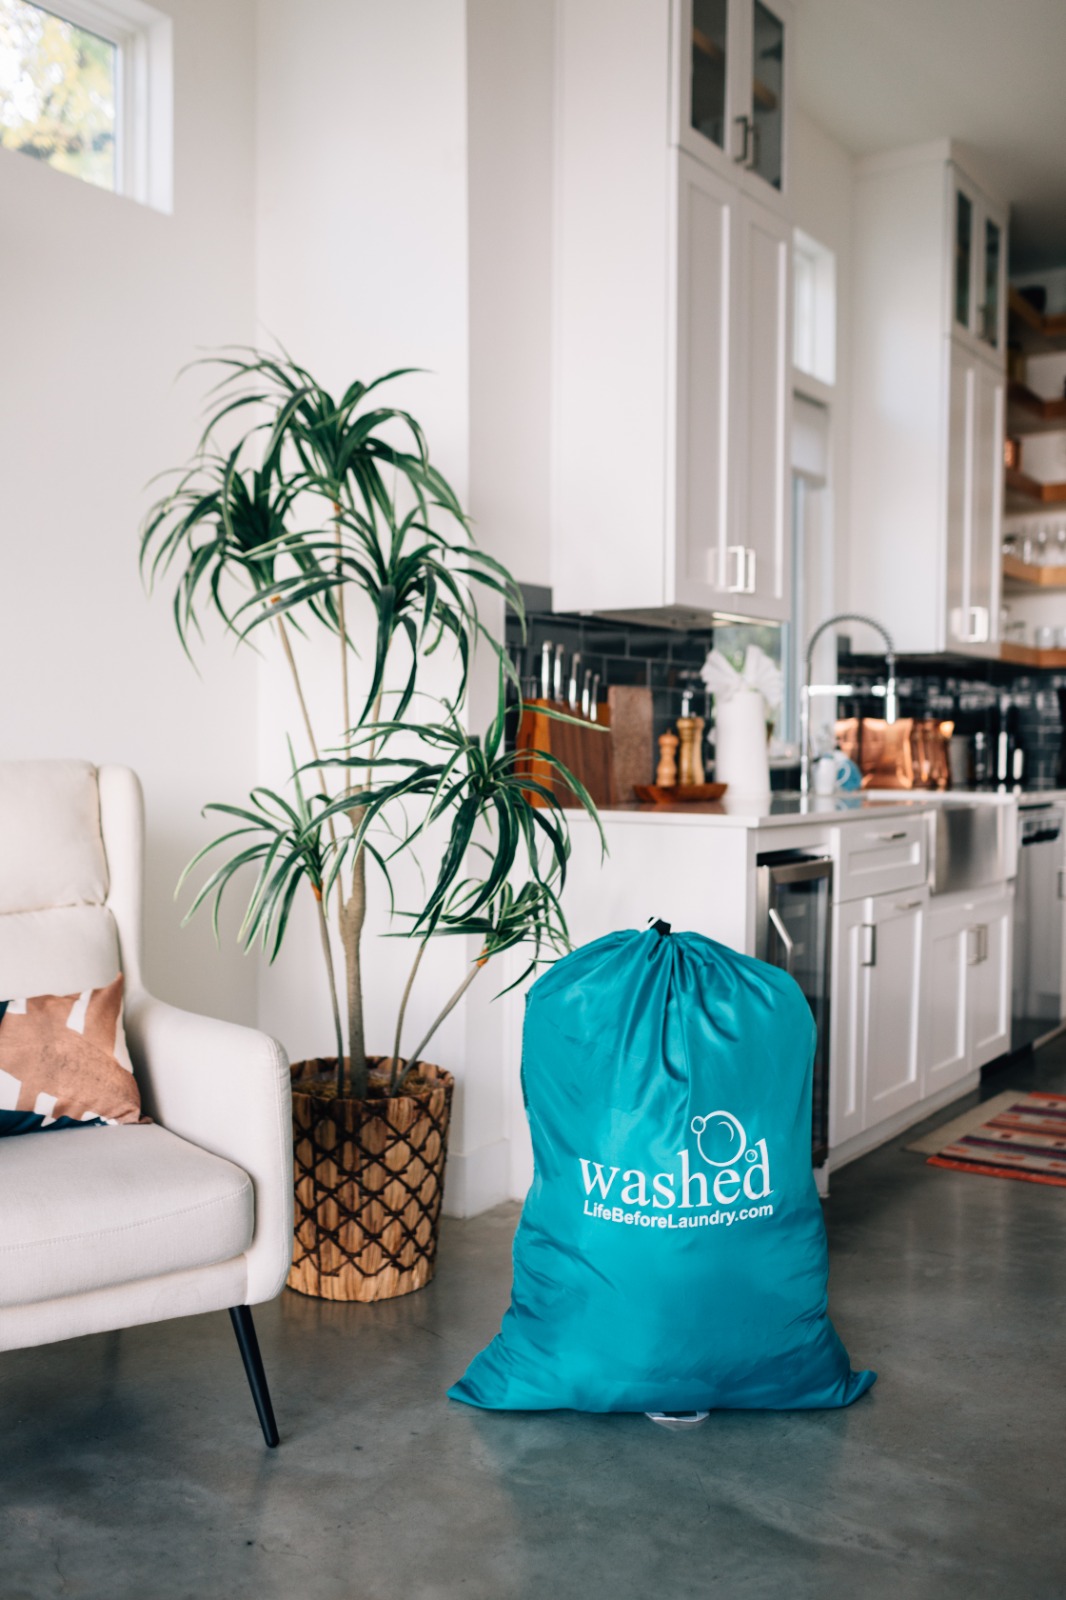 Experience Laundry Bliss at Washed: Norfolk's Top-notch Laundry Facility!